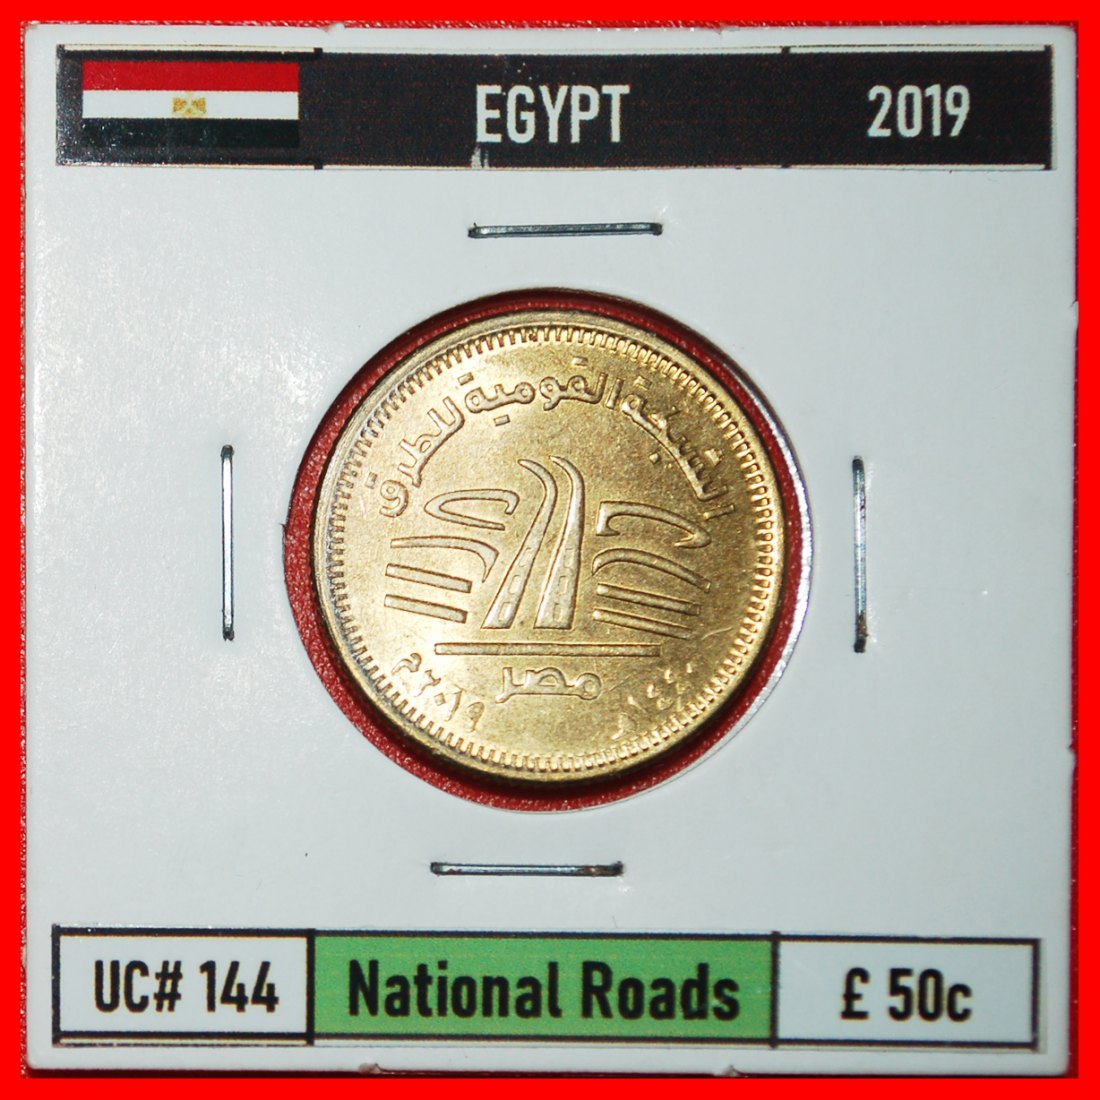  * ROADS DIE 1 : EGYPT ★ 50 PIASTRES 1440-2019 UNC MINT LUSTRE! IN HOLDER!★LOW START ★ NO RESERVE!   